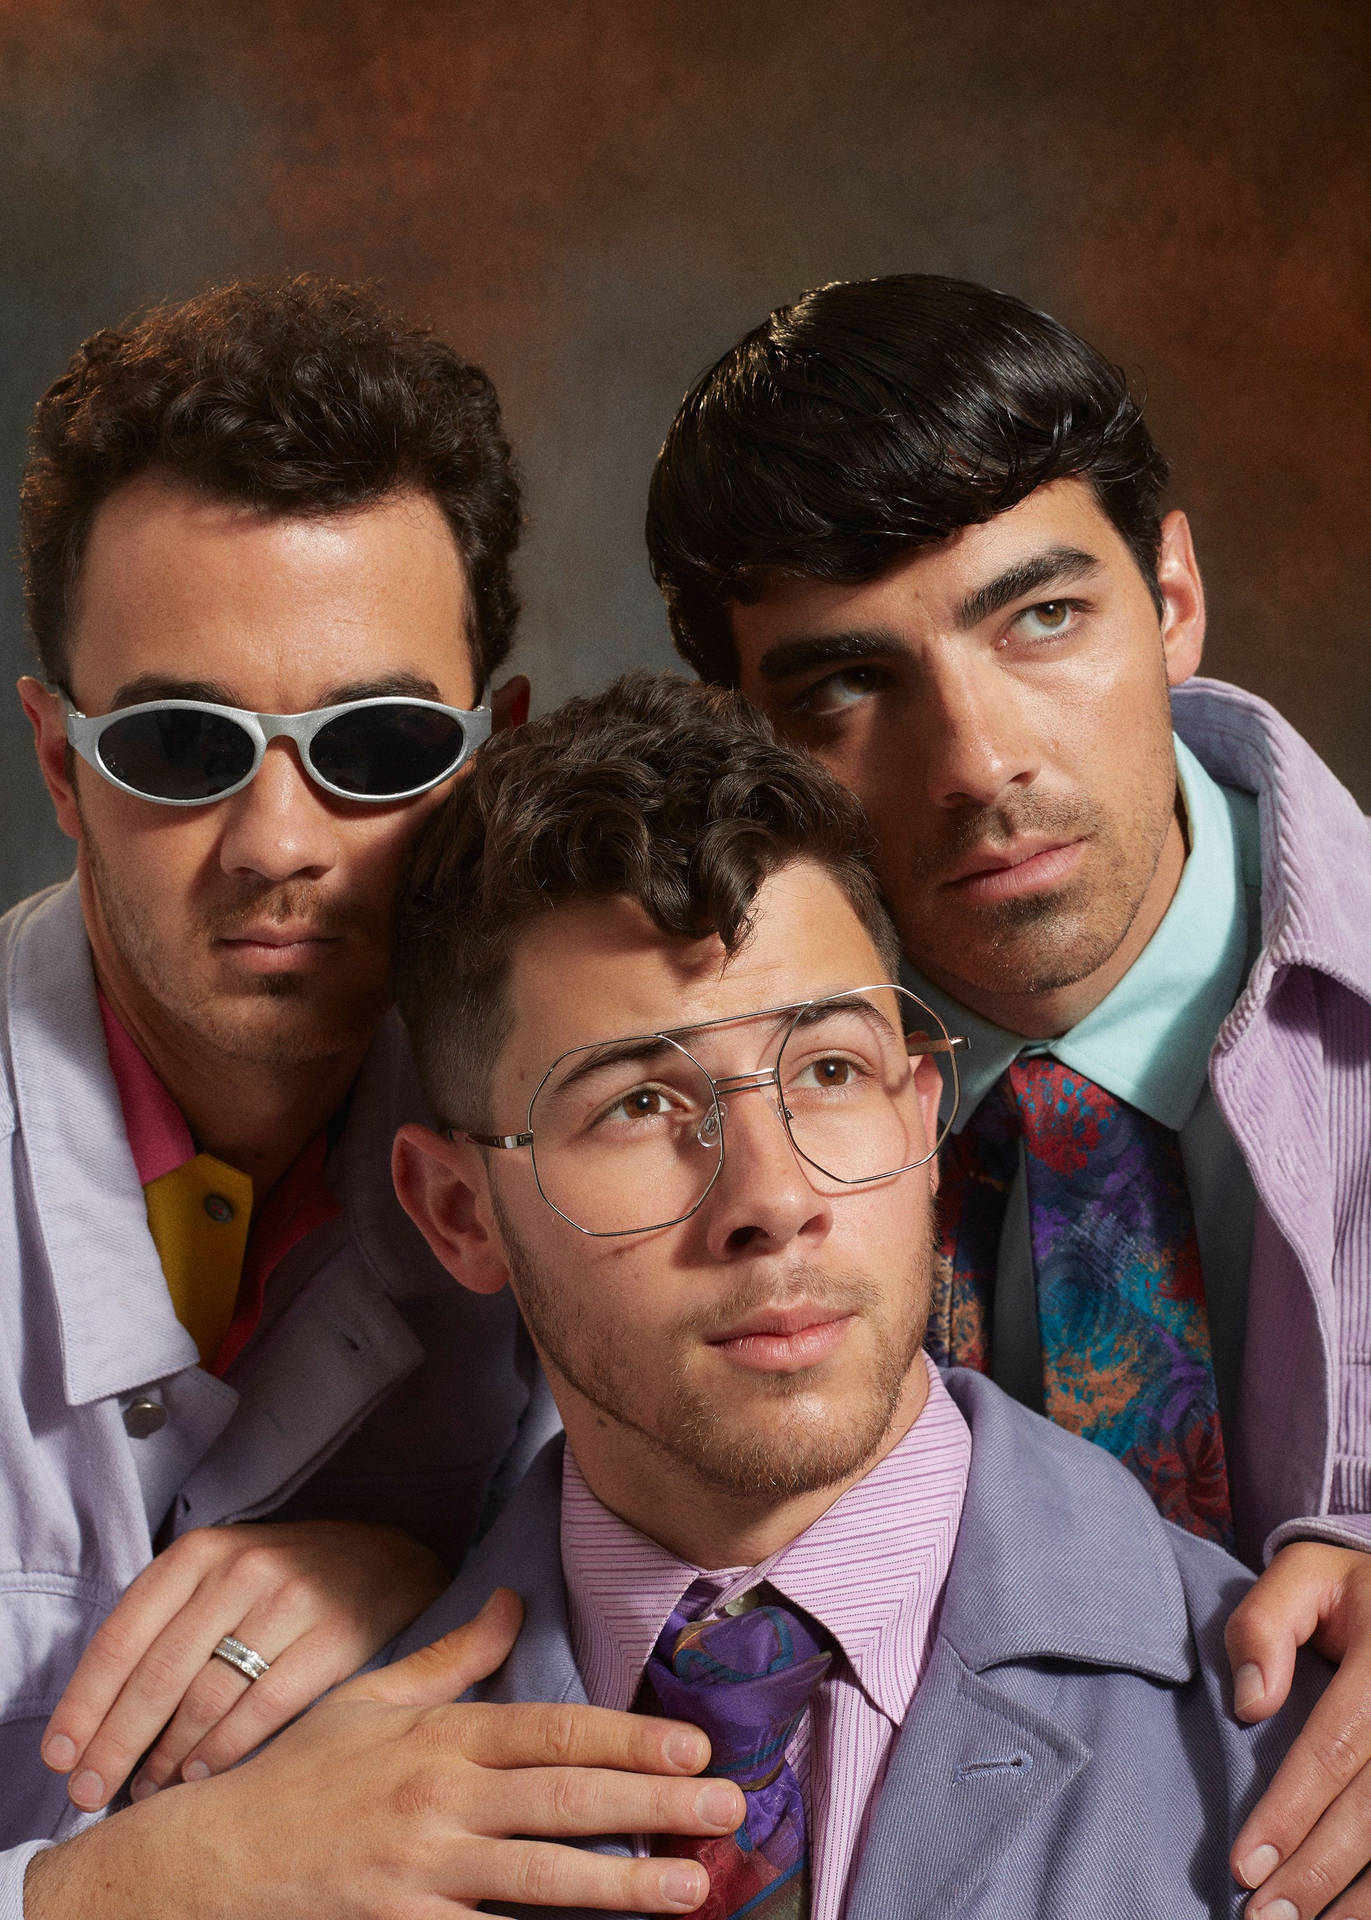 Quirky Jonas Brothers